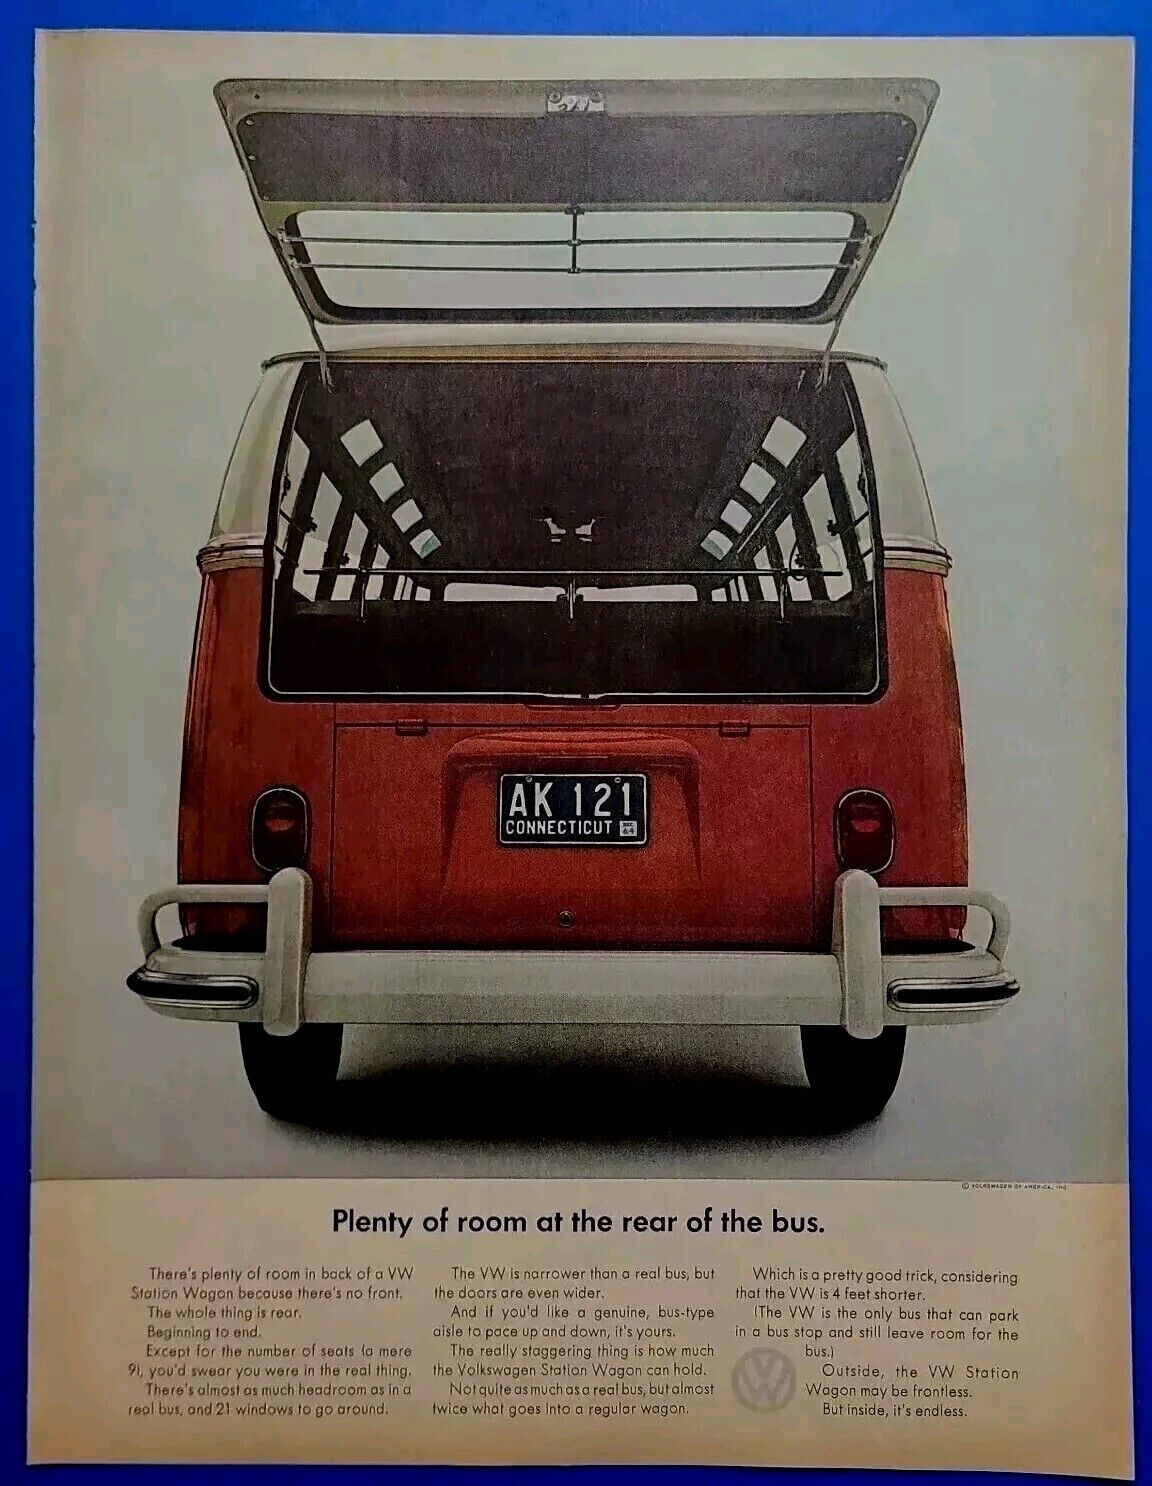 1964 Volkswagen Station Wagon Print Ad Plenty of room at the rear of the bus.